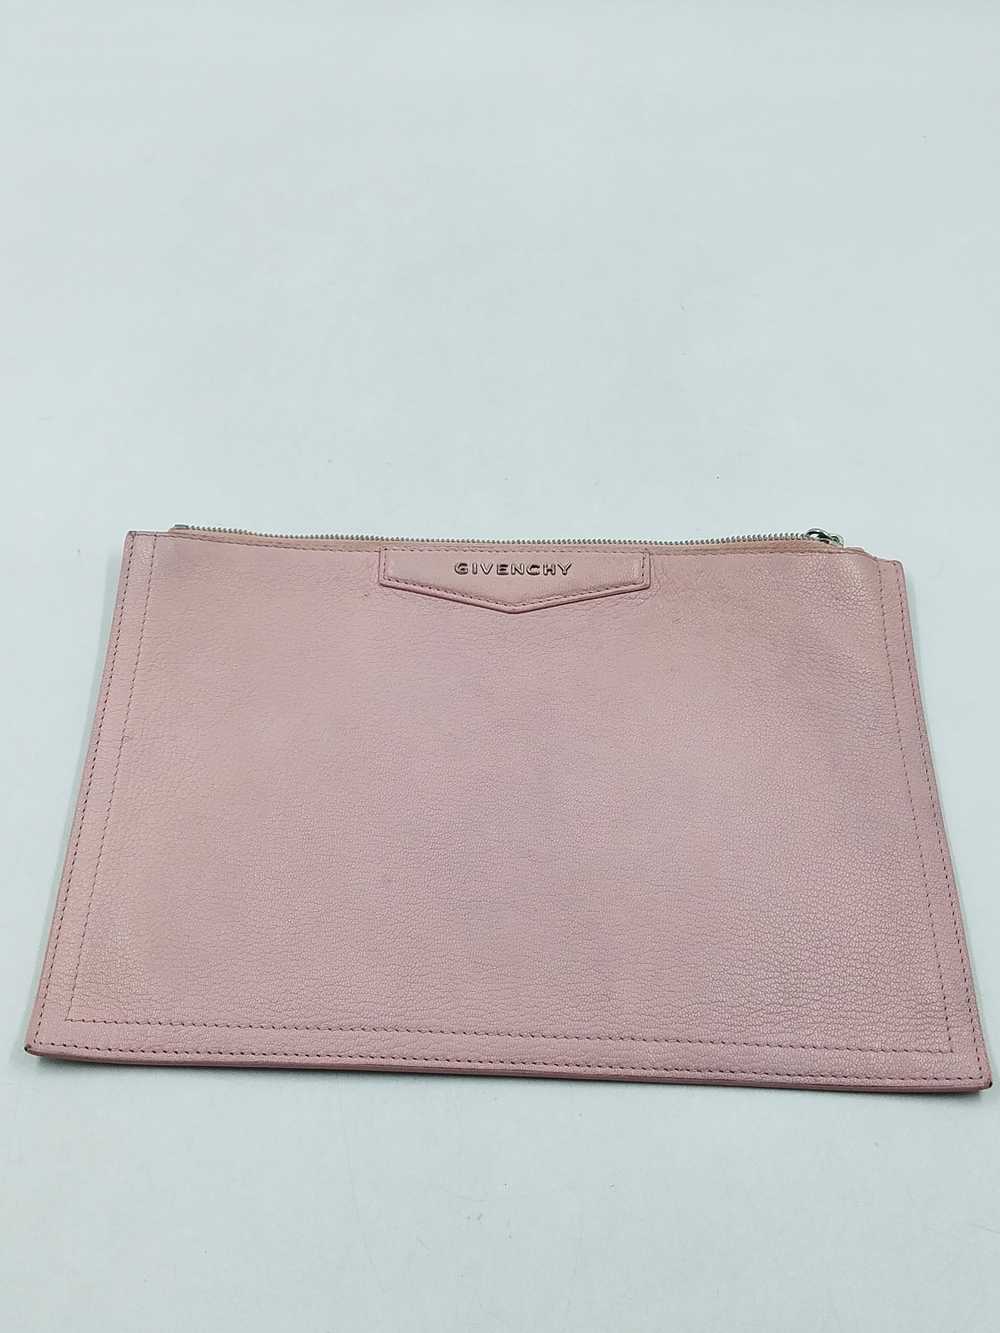 Authentic Givenchy Carnation Pink Clutch - image 1